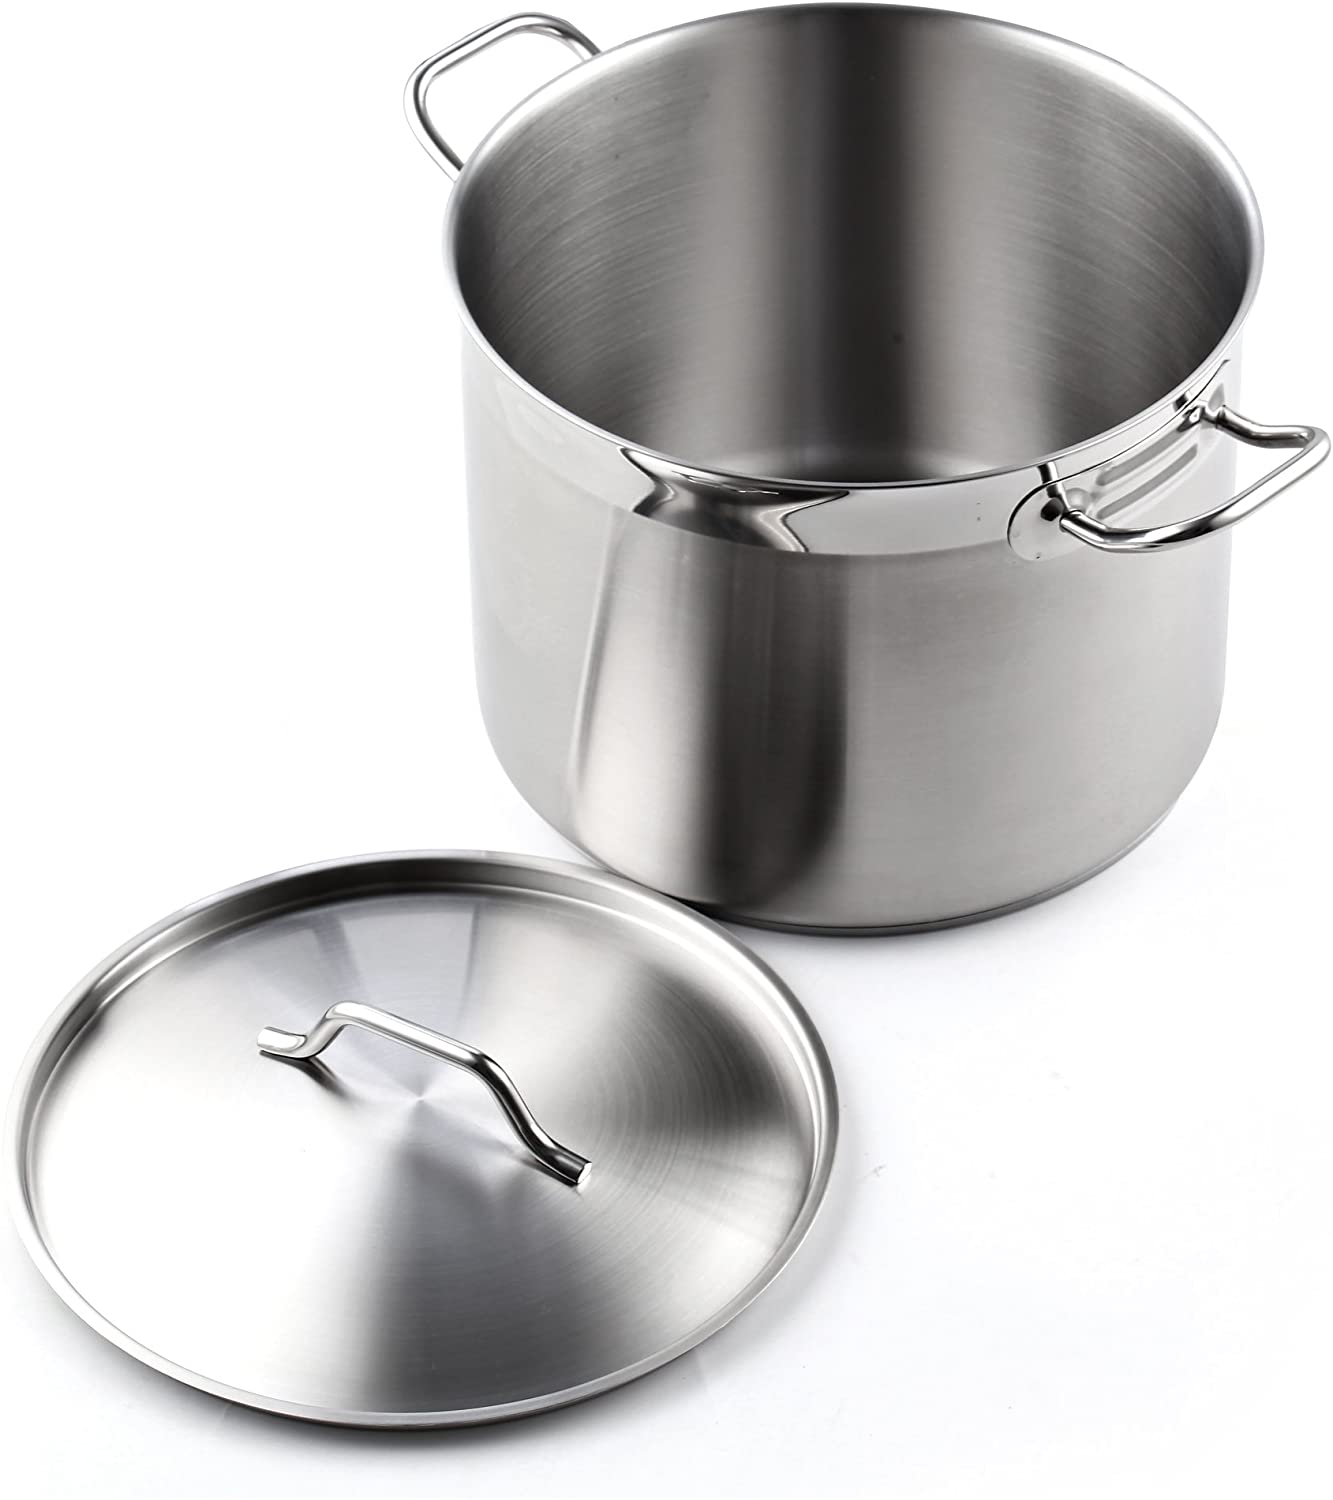 Neware Stainless Steel Stock Pot (20Qt)